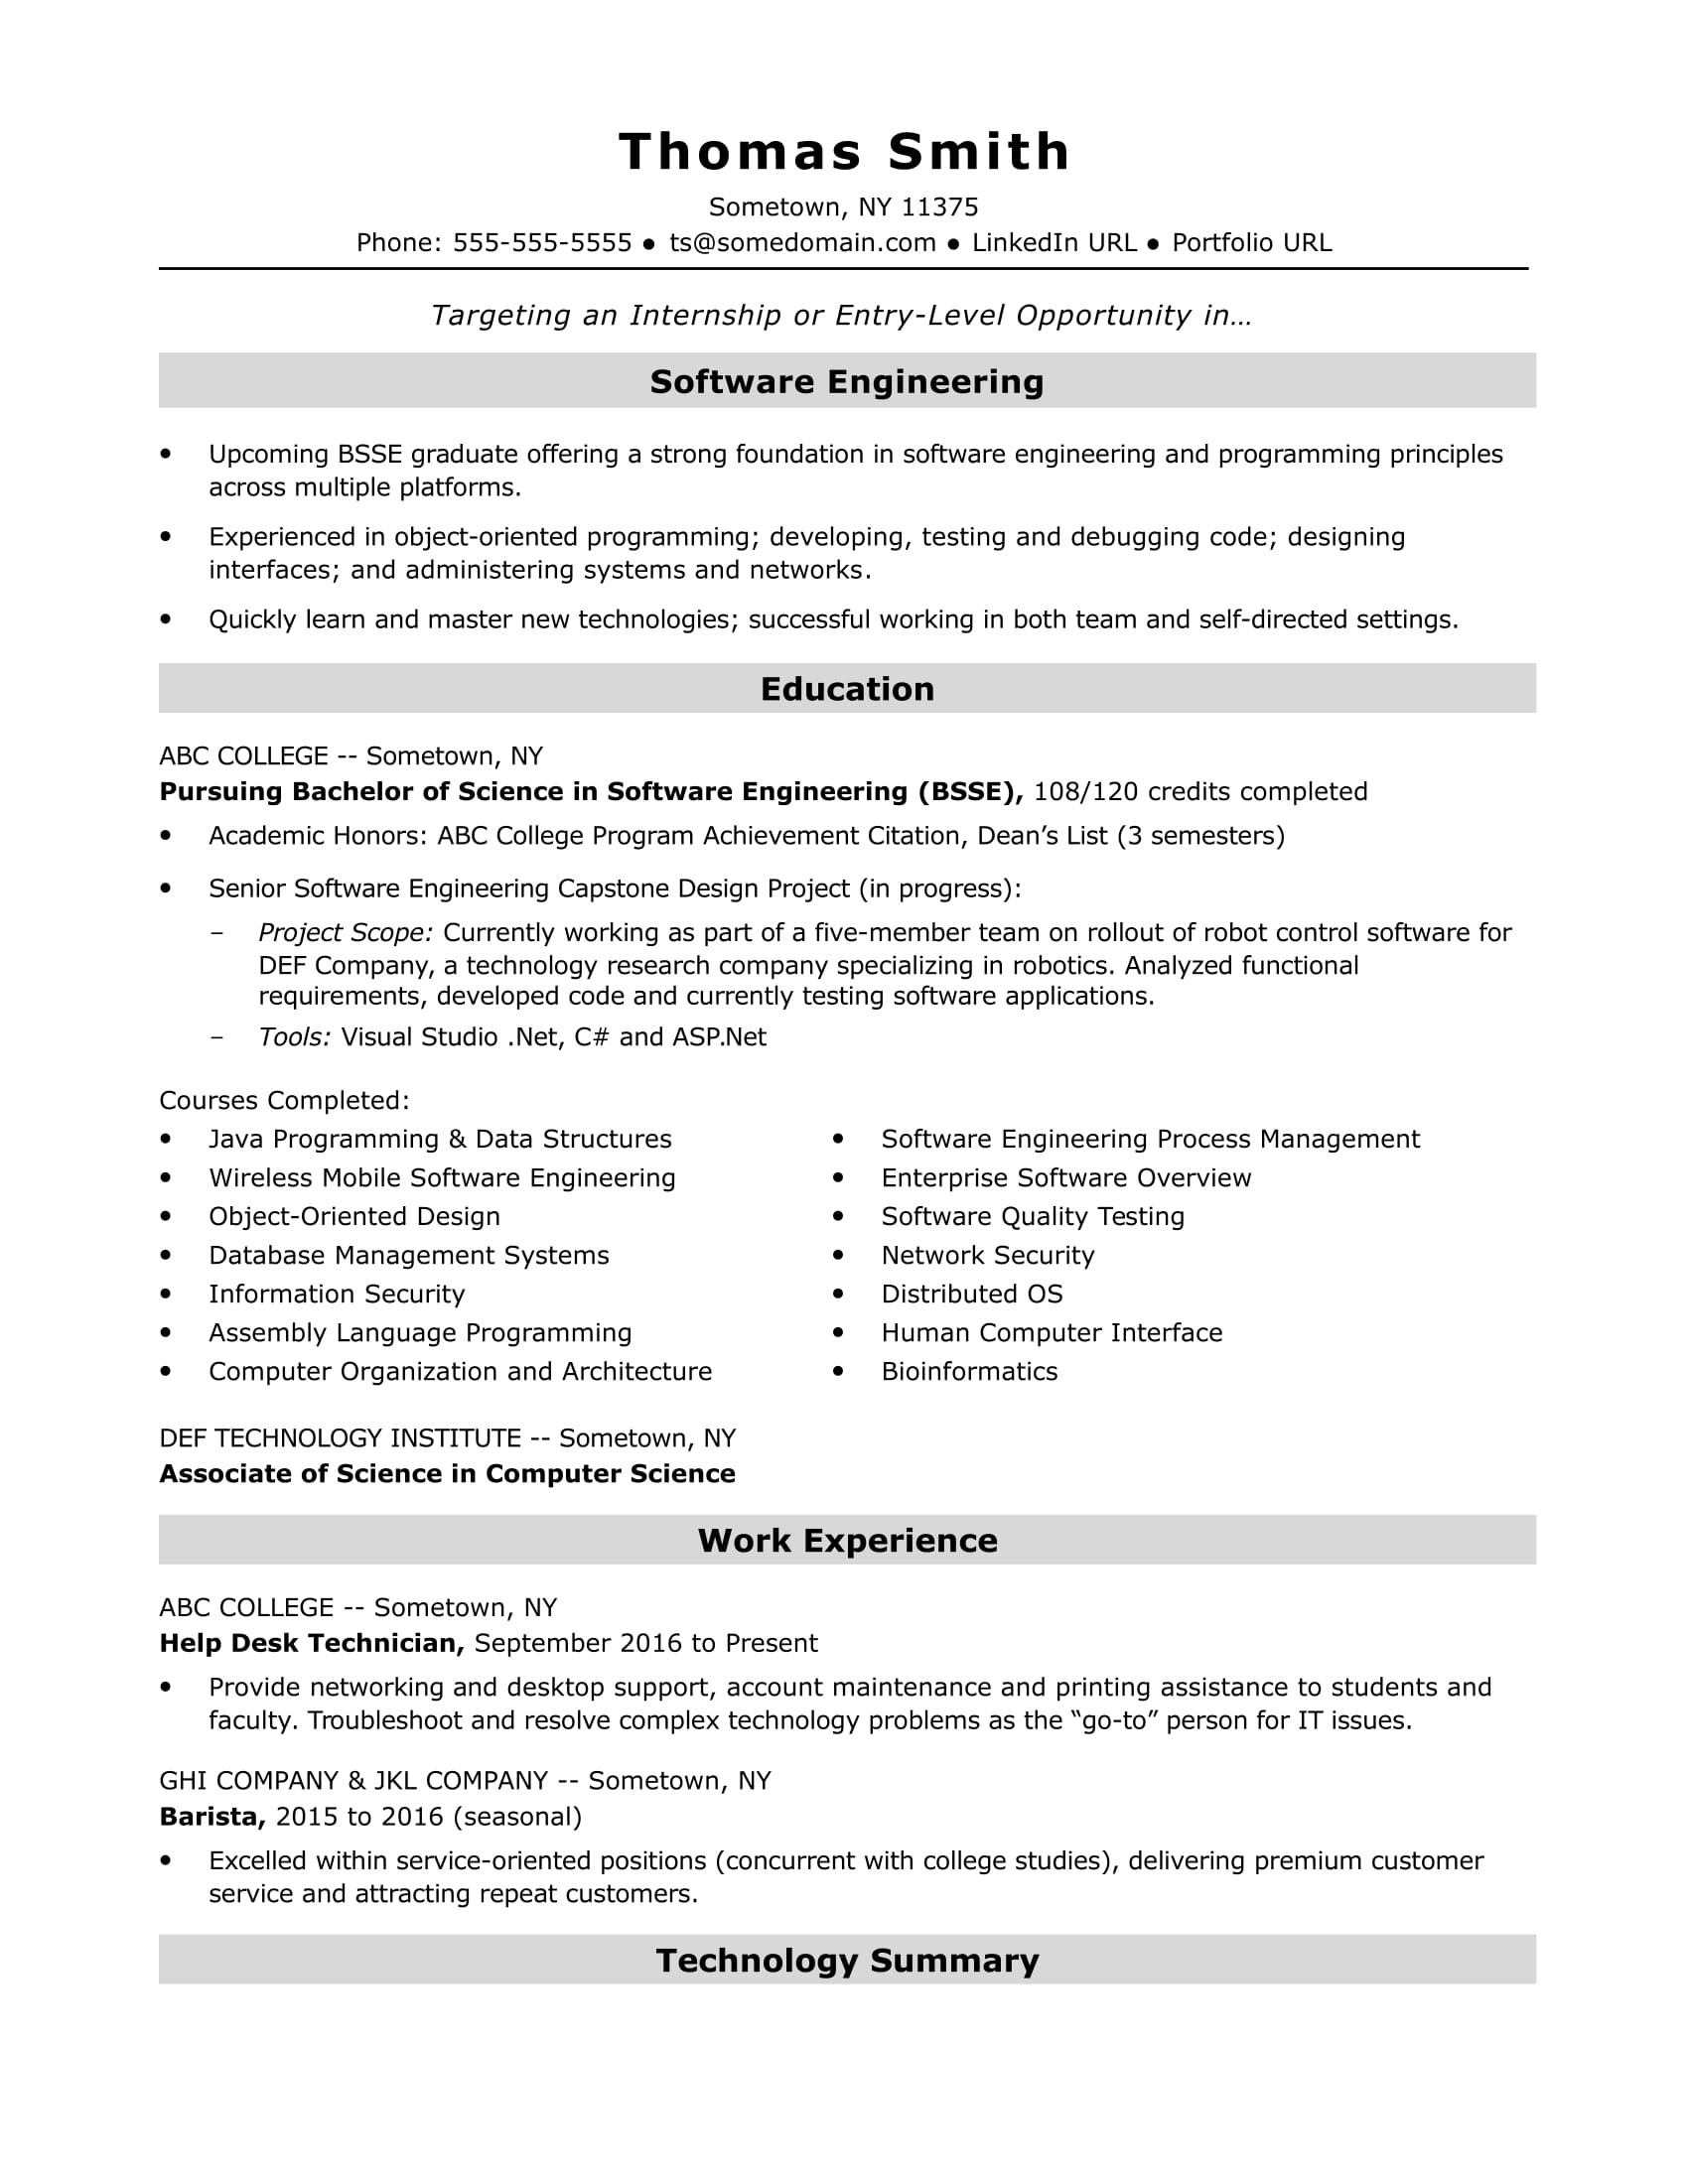 Sample Resume for Newly Computer Science Graduate Entry-level software Engineer Resume Sample Monster.com